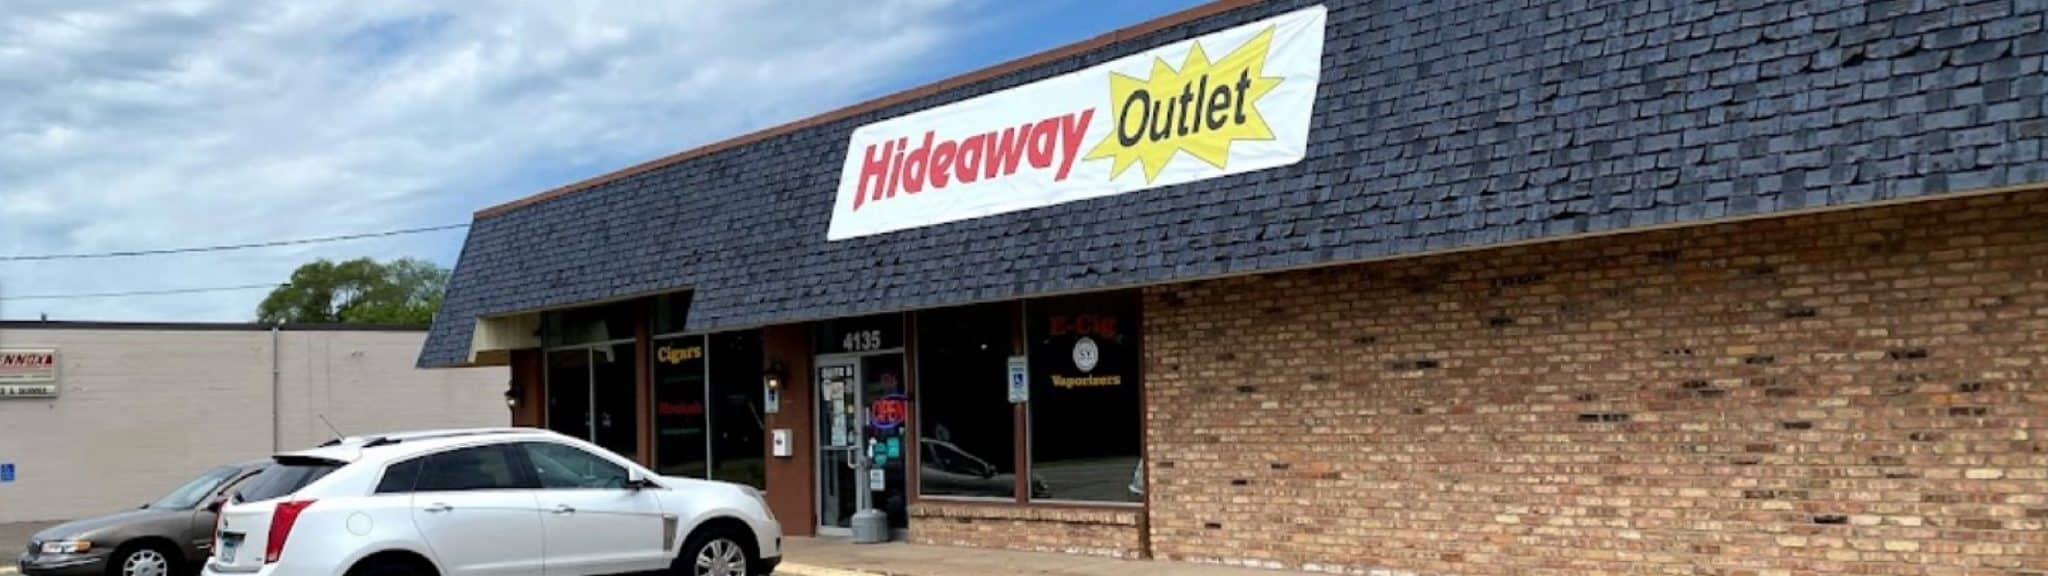 image of hideaway outlet in maple grove mn